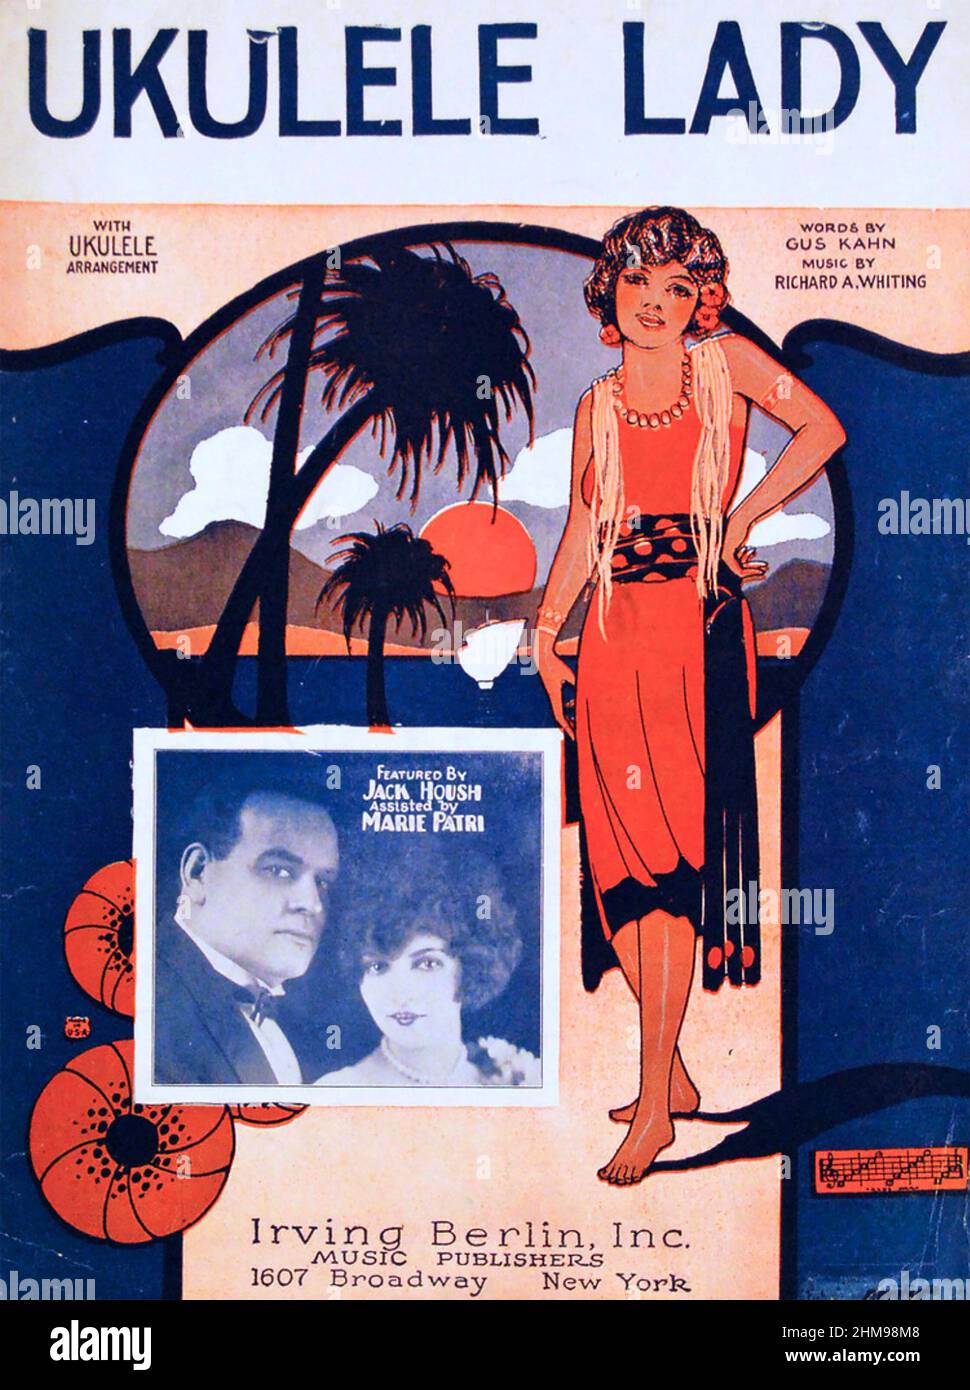 UKULELE LADY Sheet music cover of the 1925 song by Richard Whiting and Gus Kahn published by Irving Berlin's company Stock Photo